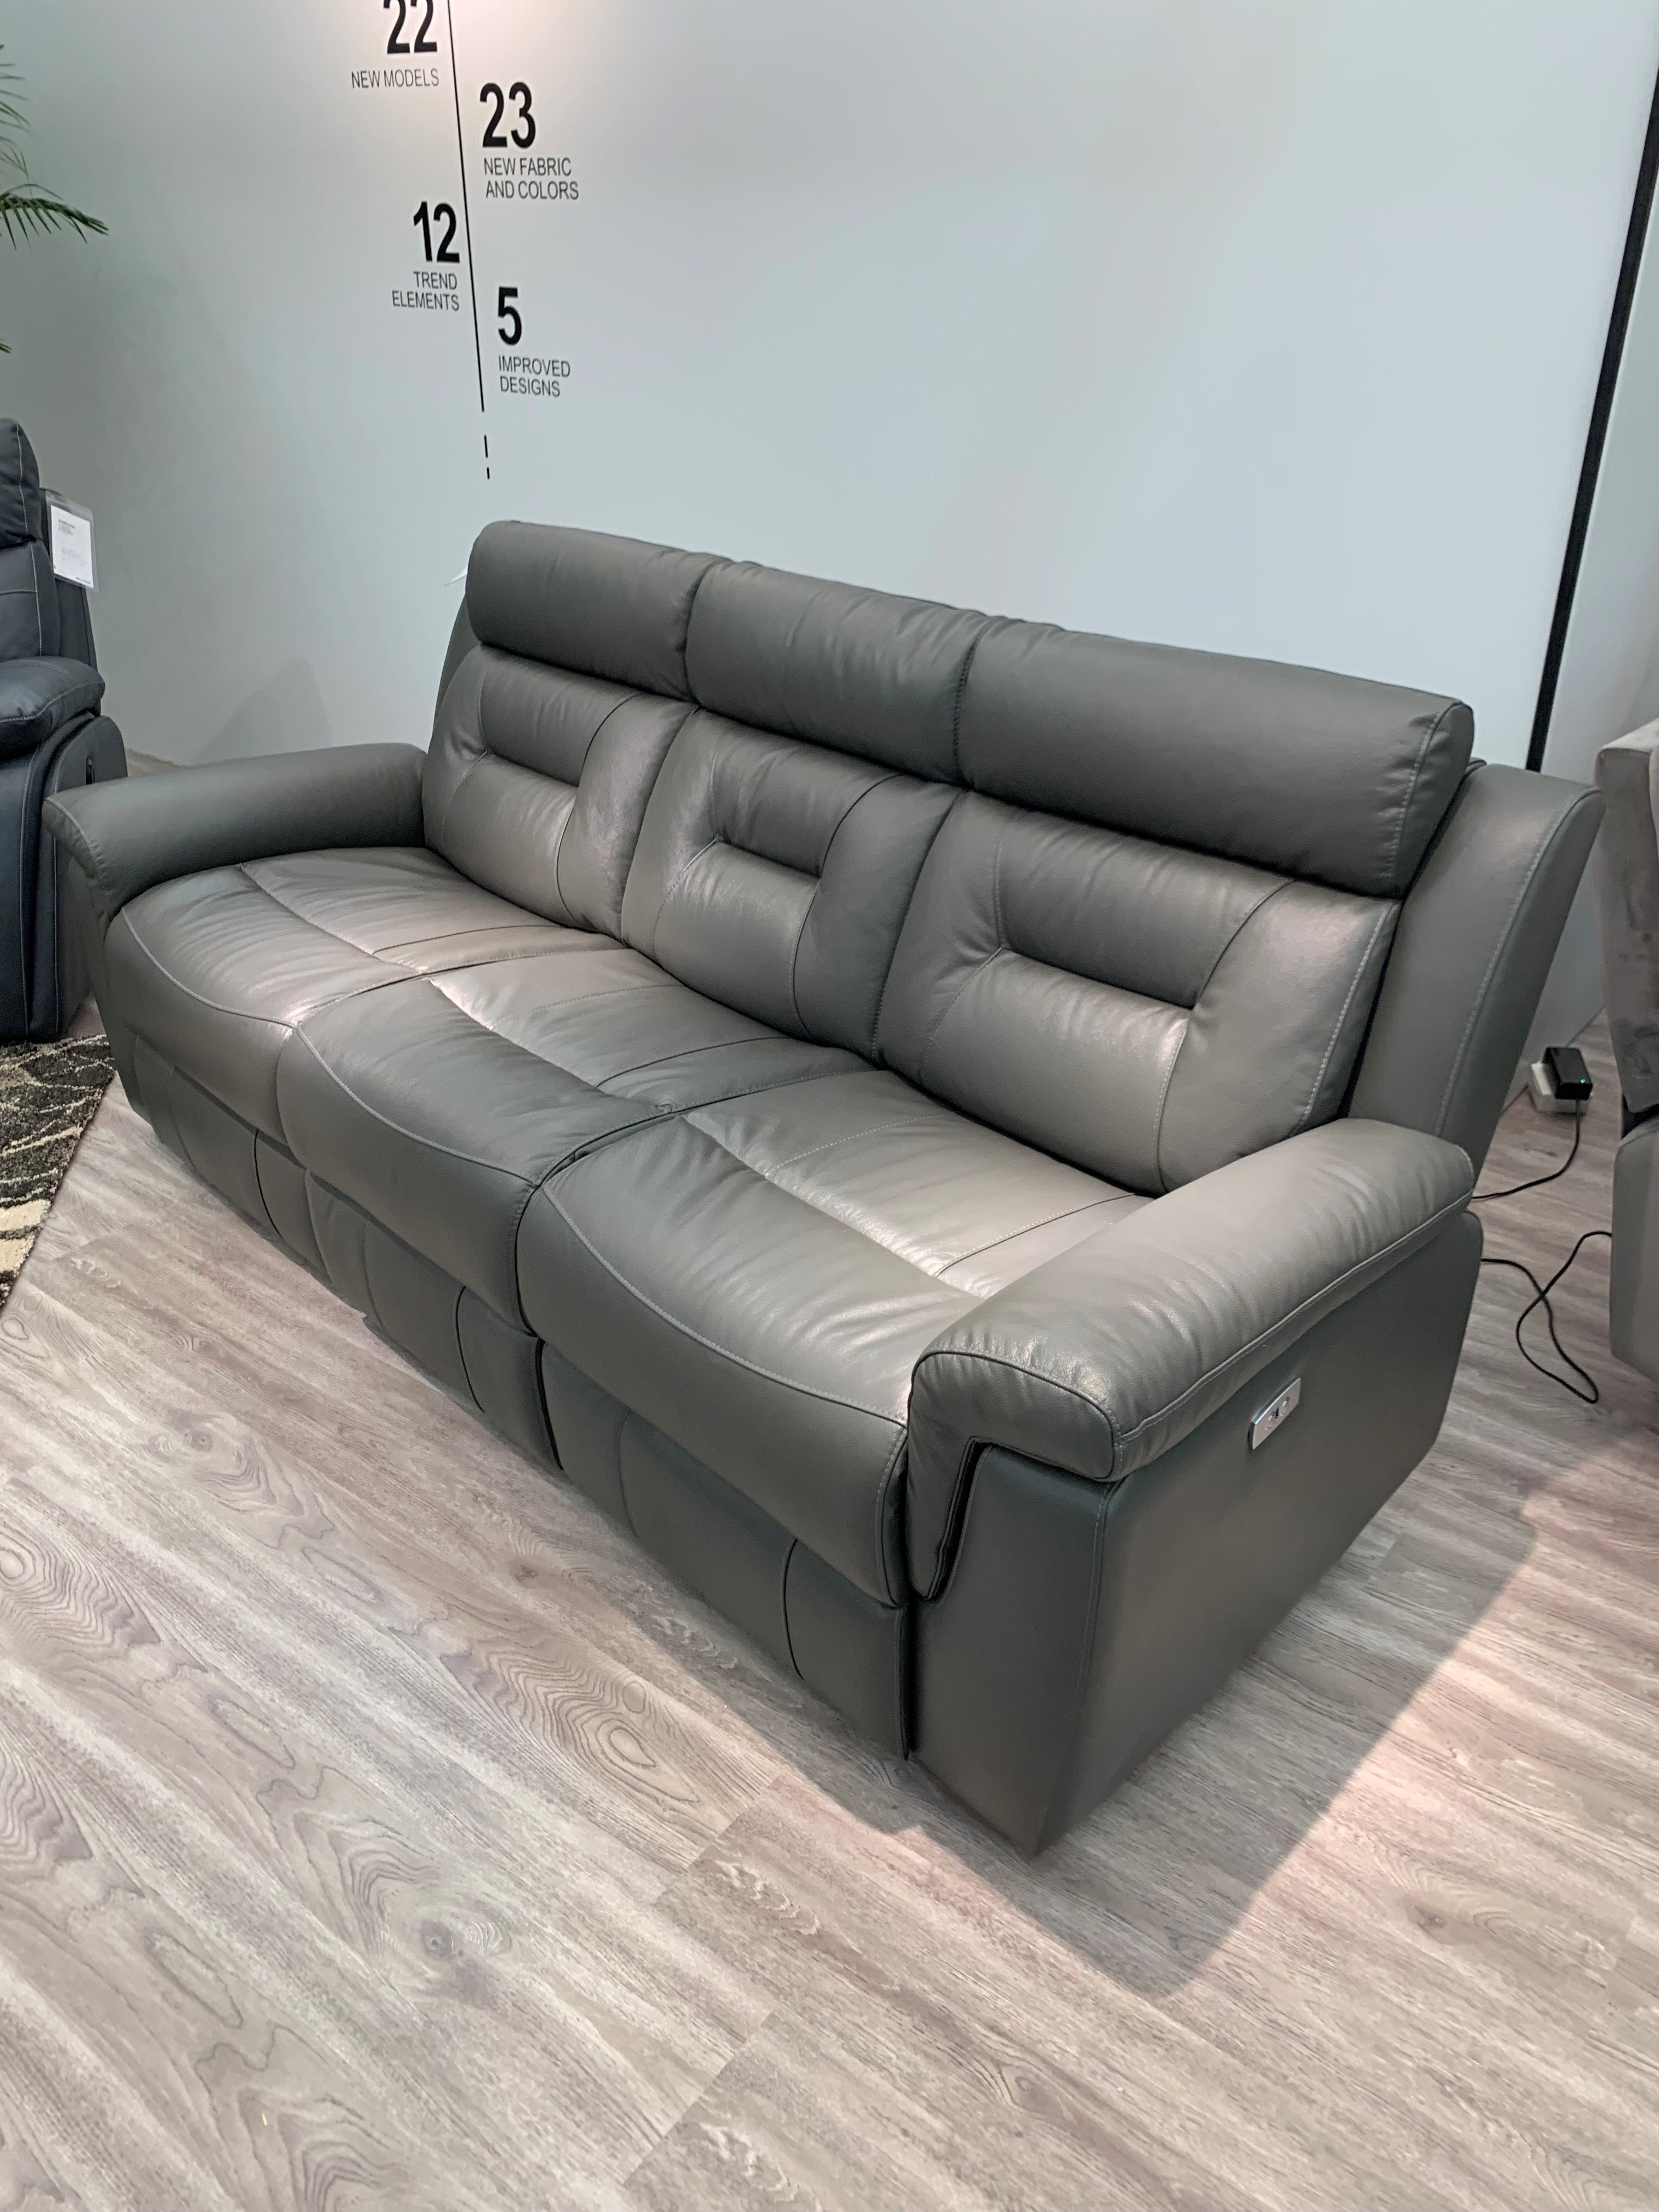 Milan 3 Seater Sofa With Power Recliner and USB port